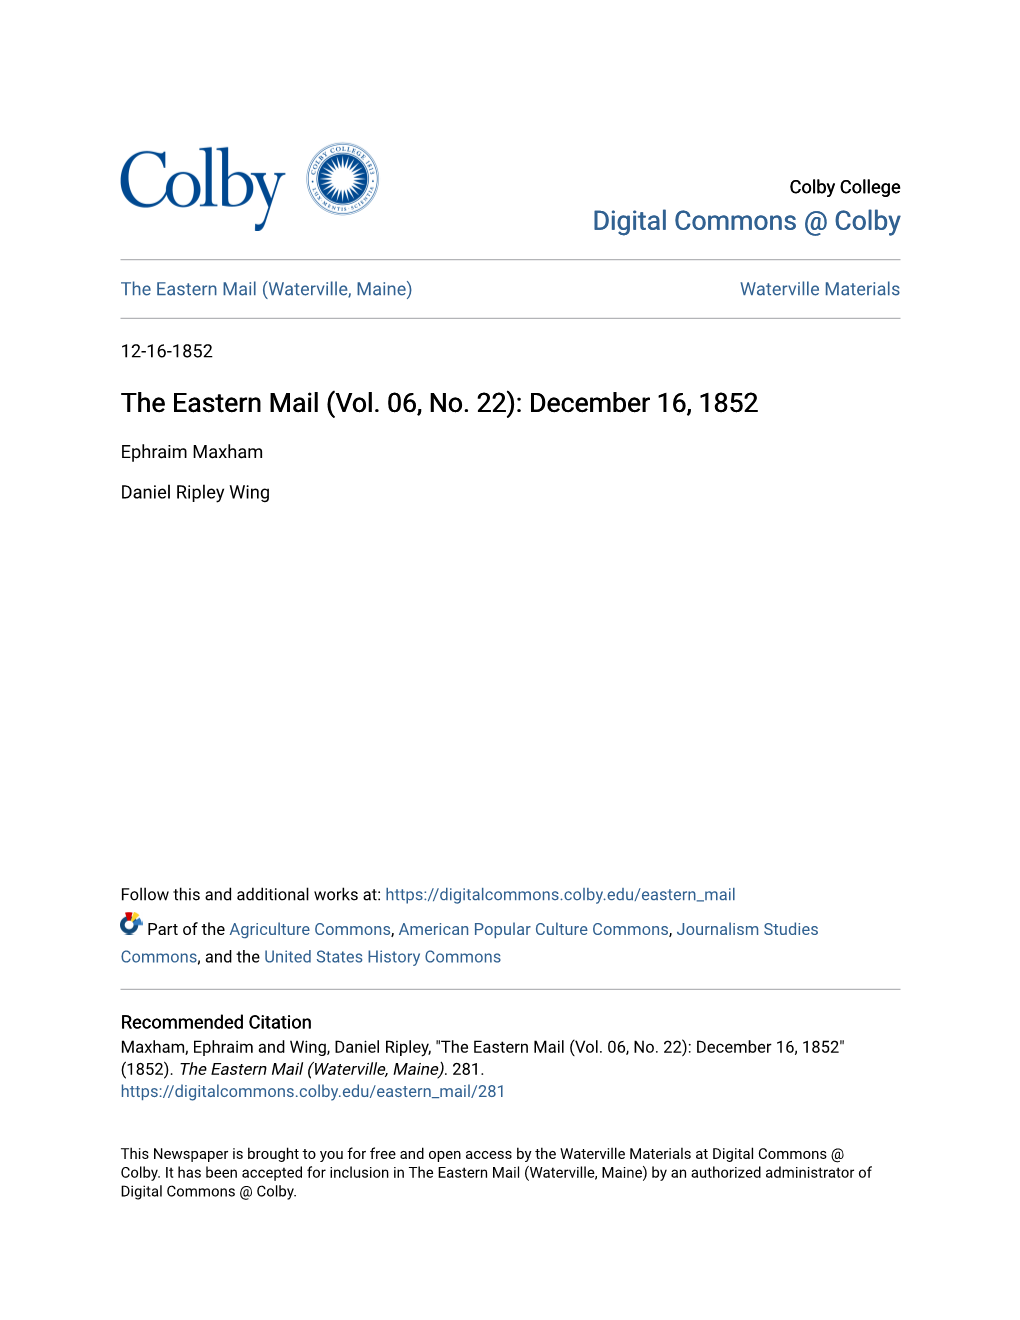 The Eastern Mail (Vol. 06, No. 22): December 16, 1852